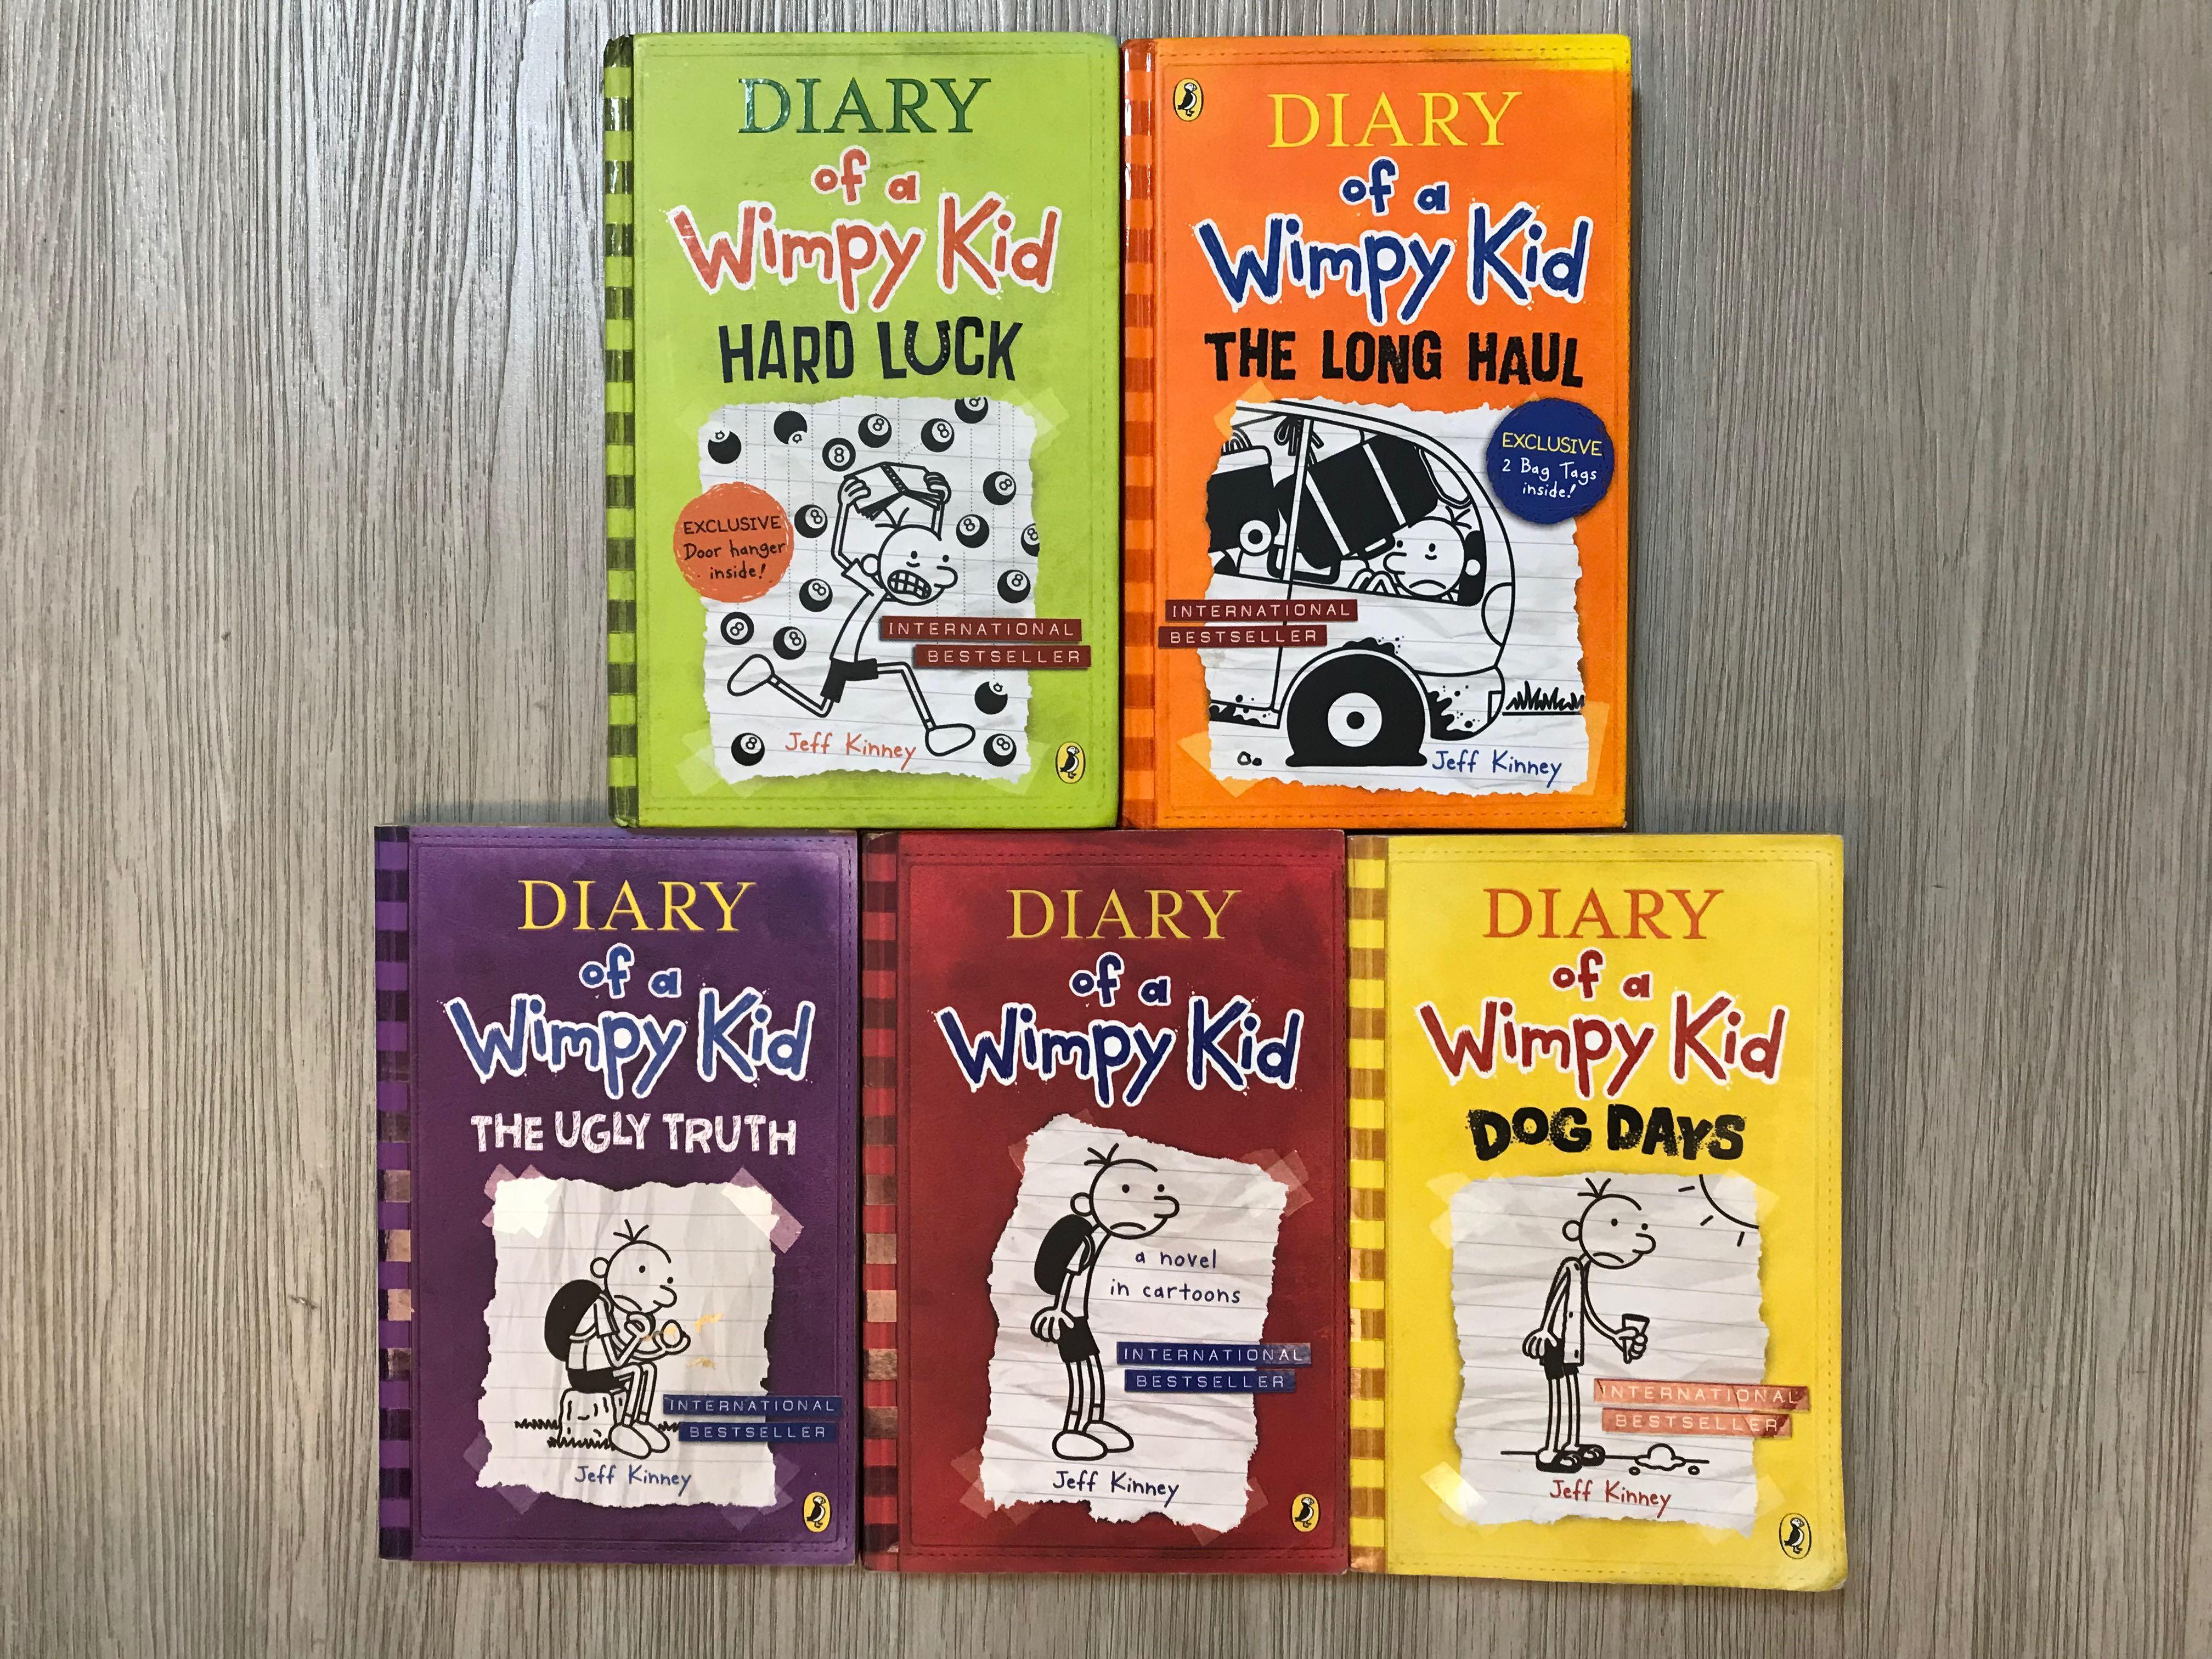 Diary of a Wimpy Kid books 英語版 8冊セット - 洋書